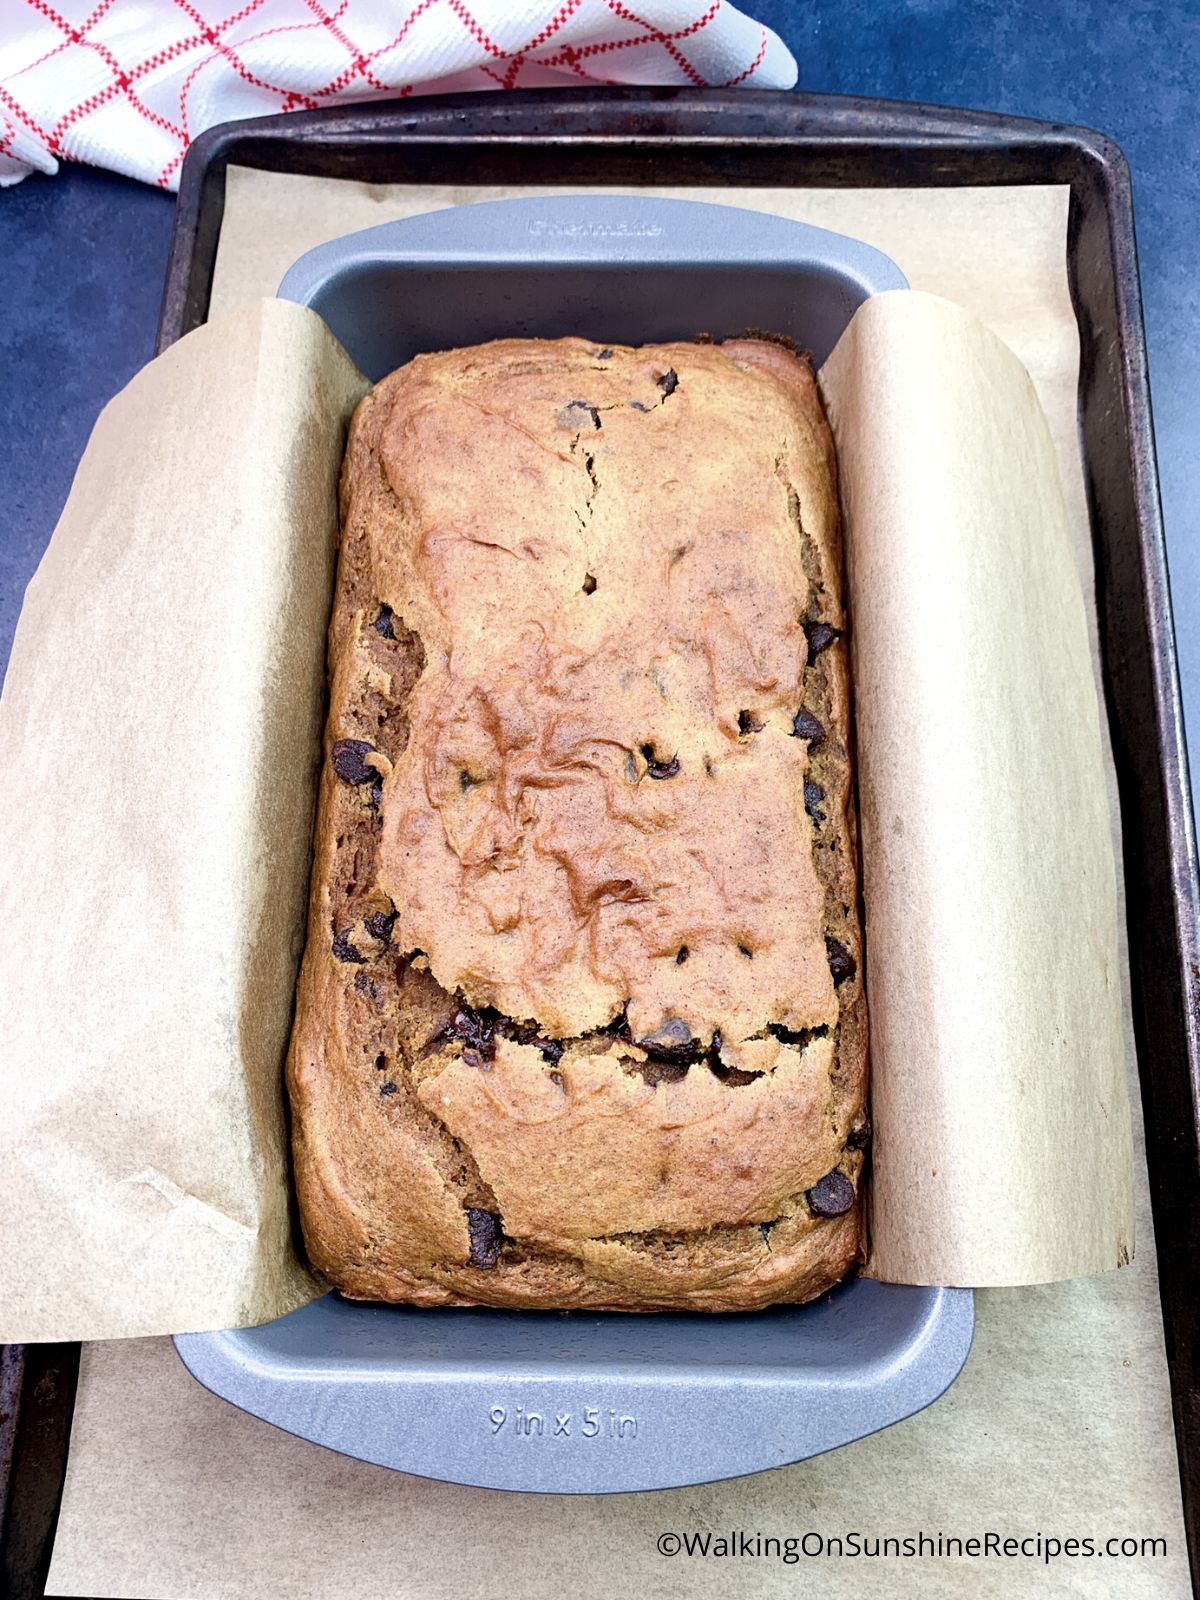 Chocolate chip pumpkin bread baked in loaf pan.